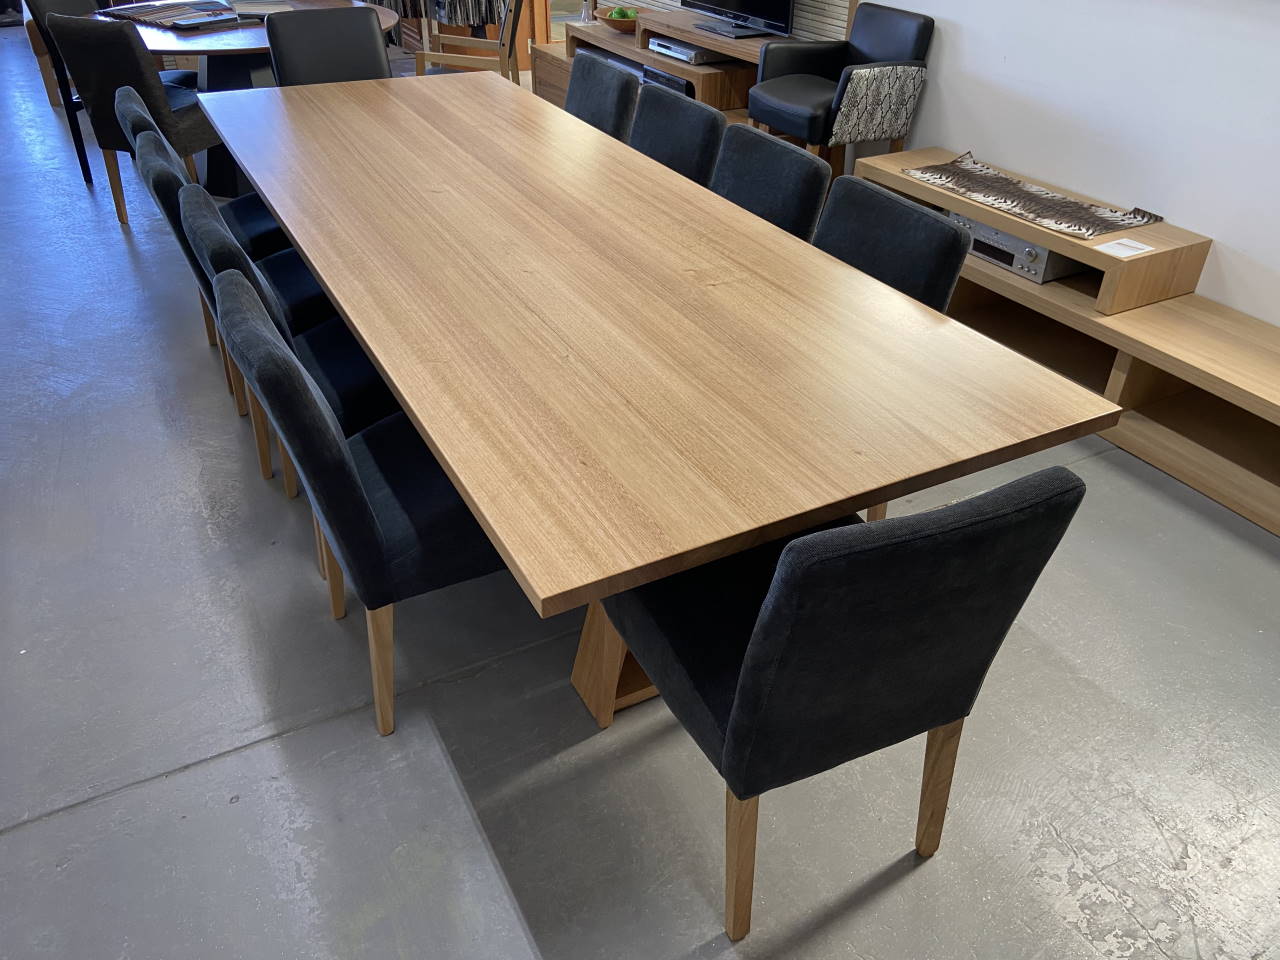 Solid 12 Seater Dining Table Tasmanian Oak Timber 2 Pack Polyurethane Quality Furniture Adelaide, South Australia